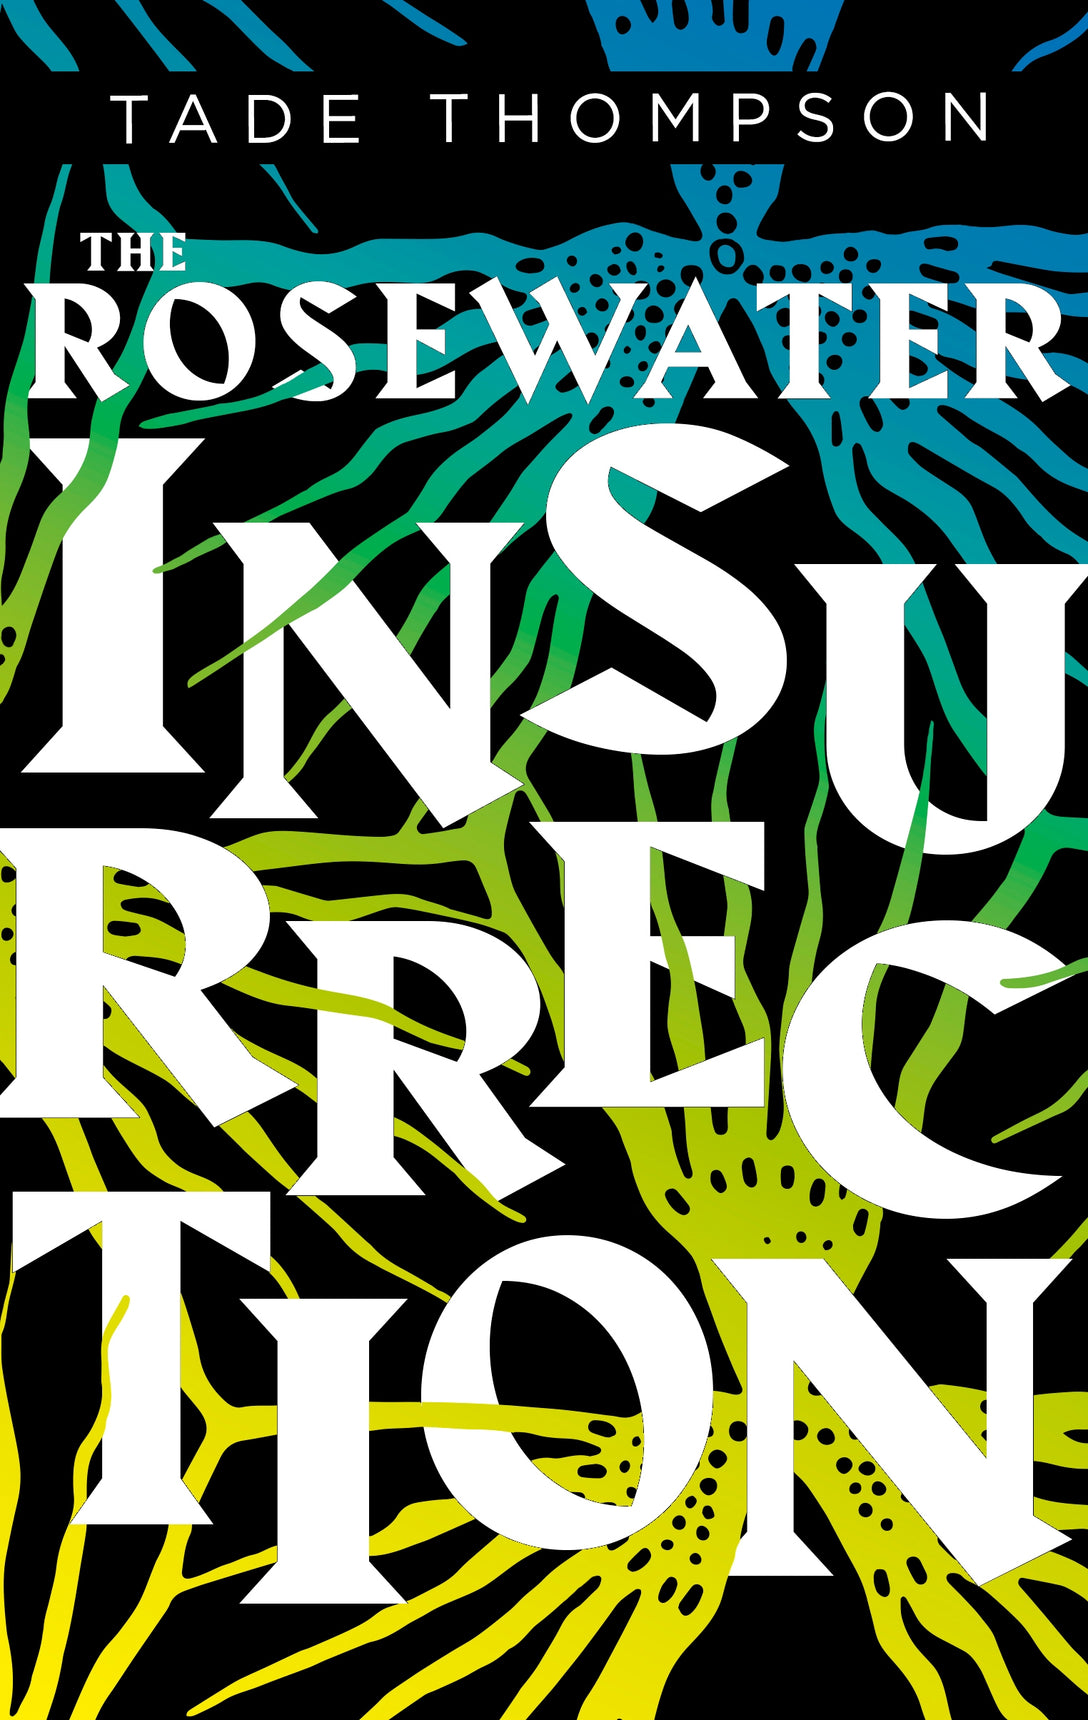 The Rosewater Insurrection by Tade Thompson